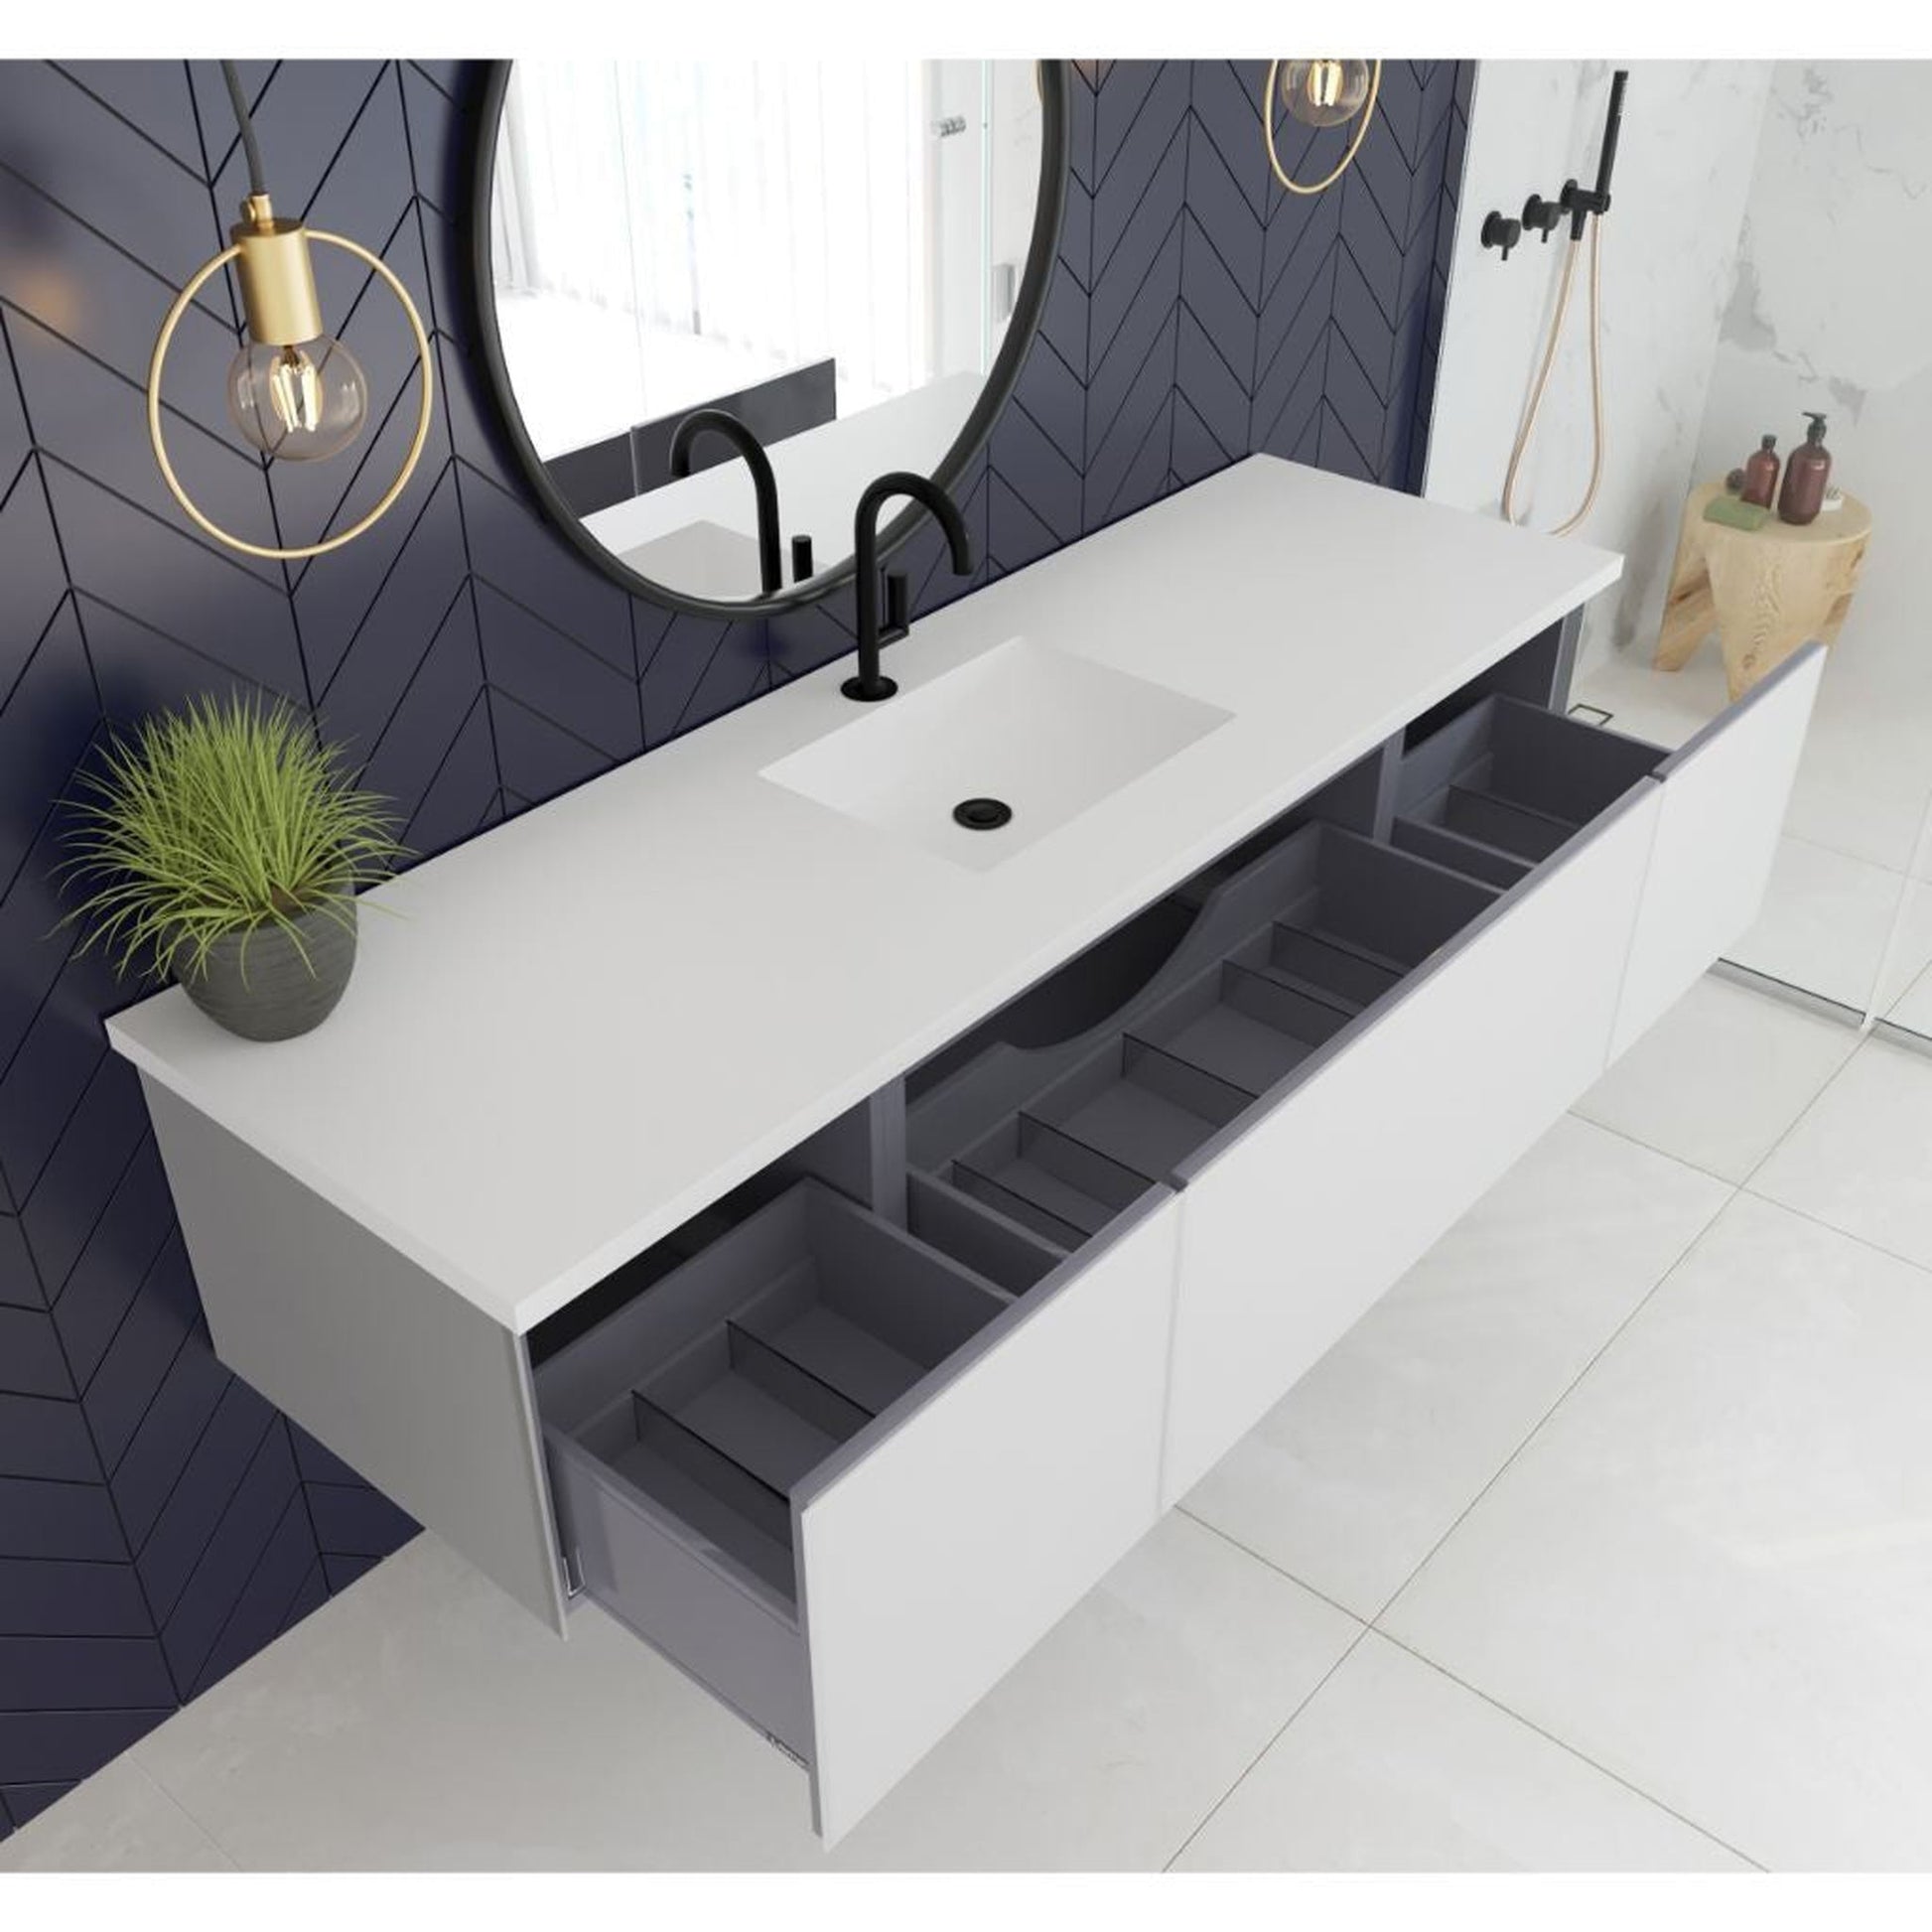 Laviva Vitri 72" Cloud White Vanity Base and Matte White Solid Surface Countertop With Single Integrated Sink